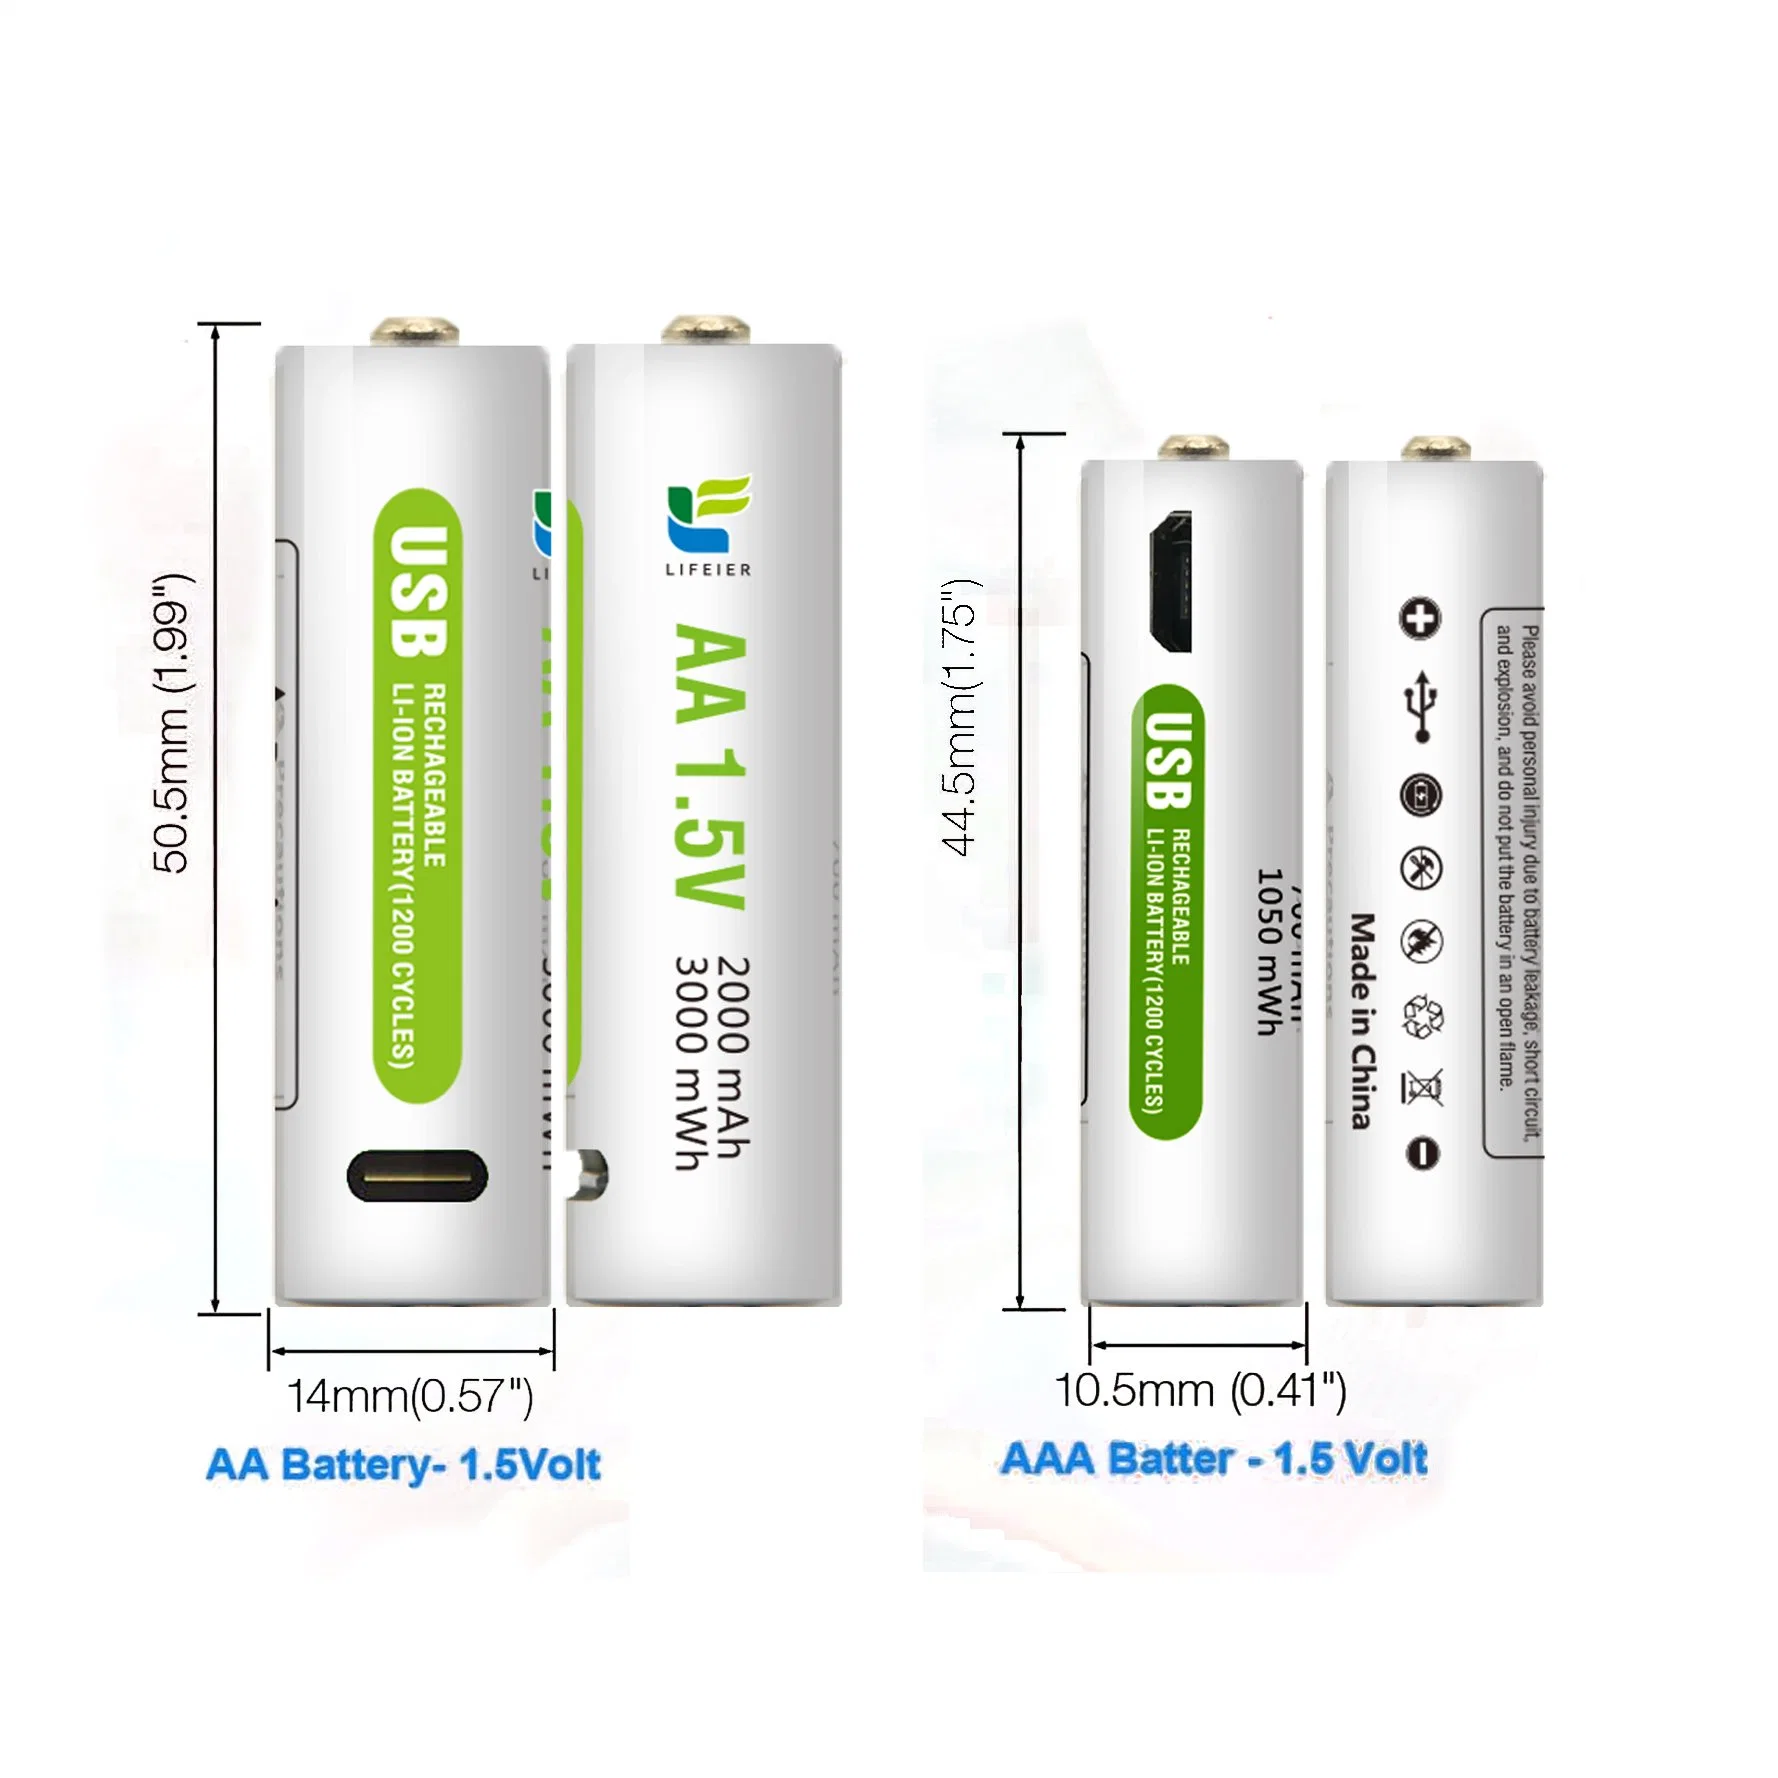 Type C 1.5V USB Rechargeable Battery, Rechargeable Lithium-Ion Battery, AA Lithium Battery